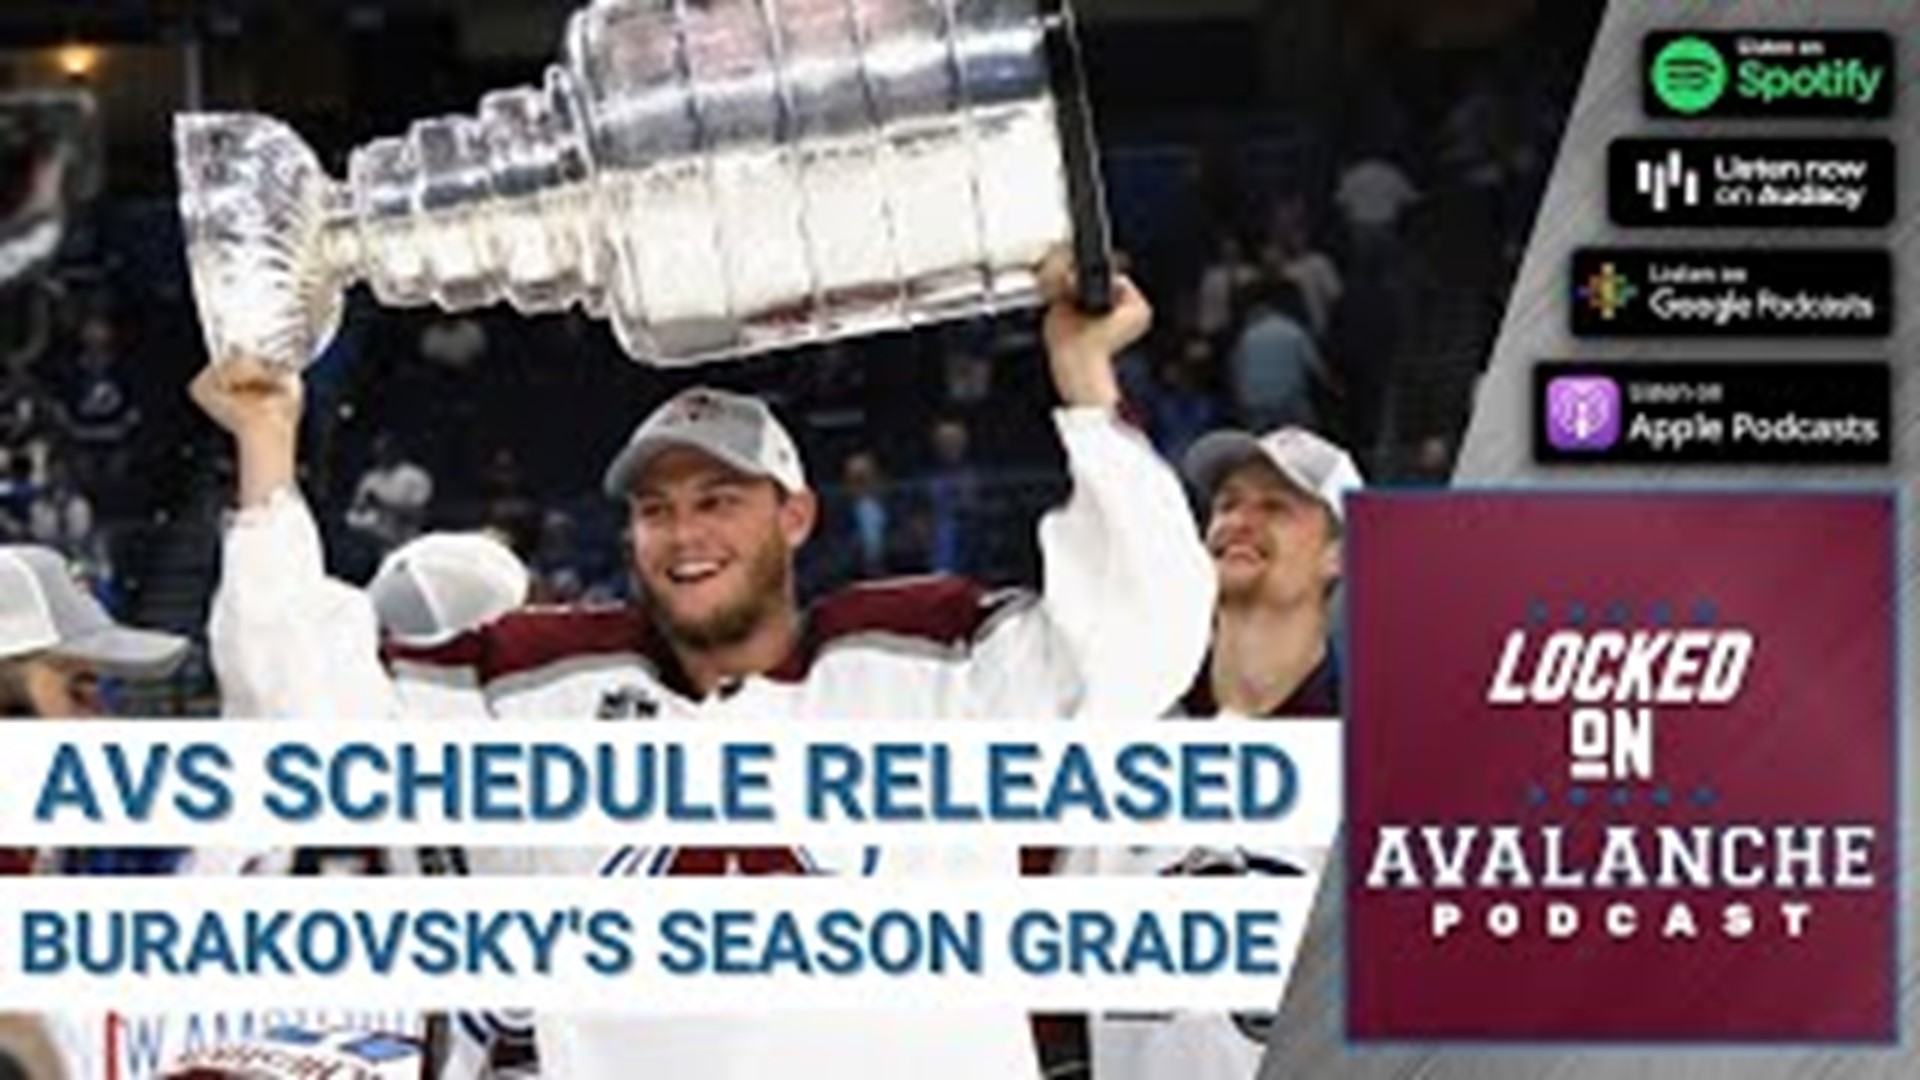 The NHL released the full season schedule for next season and there are some interesting dates and times for the Colorado Avalanche.